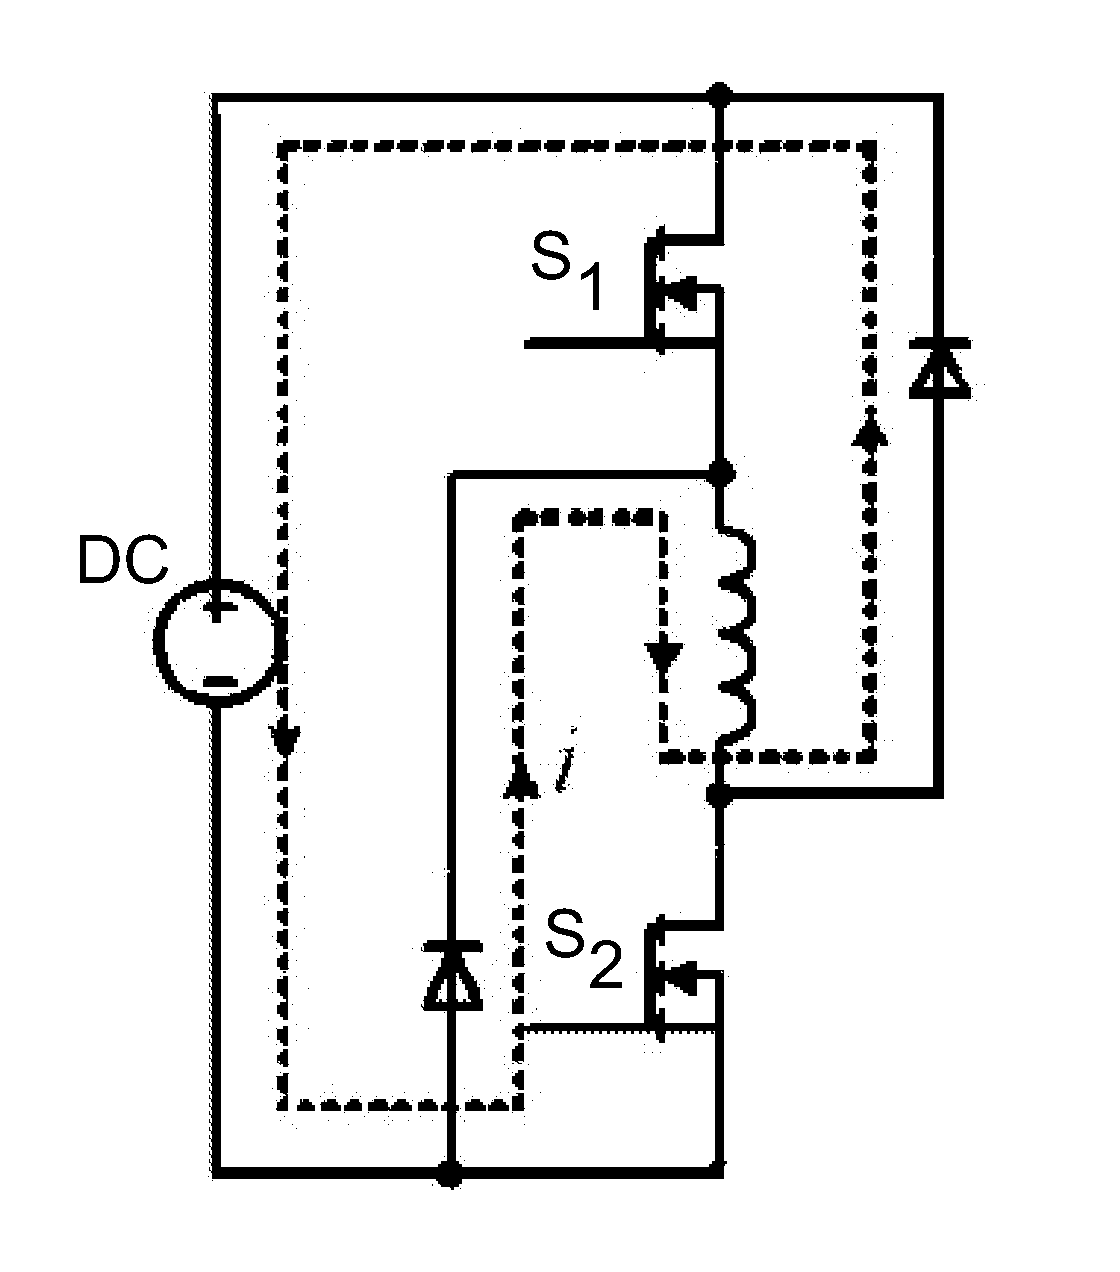 Position Sensorless Step-Wise Freewheeling Control Method for Switched Reluctance Motor